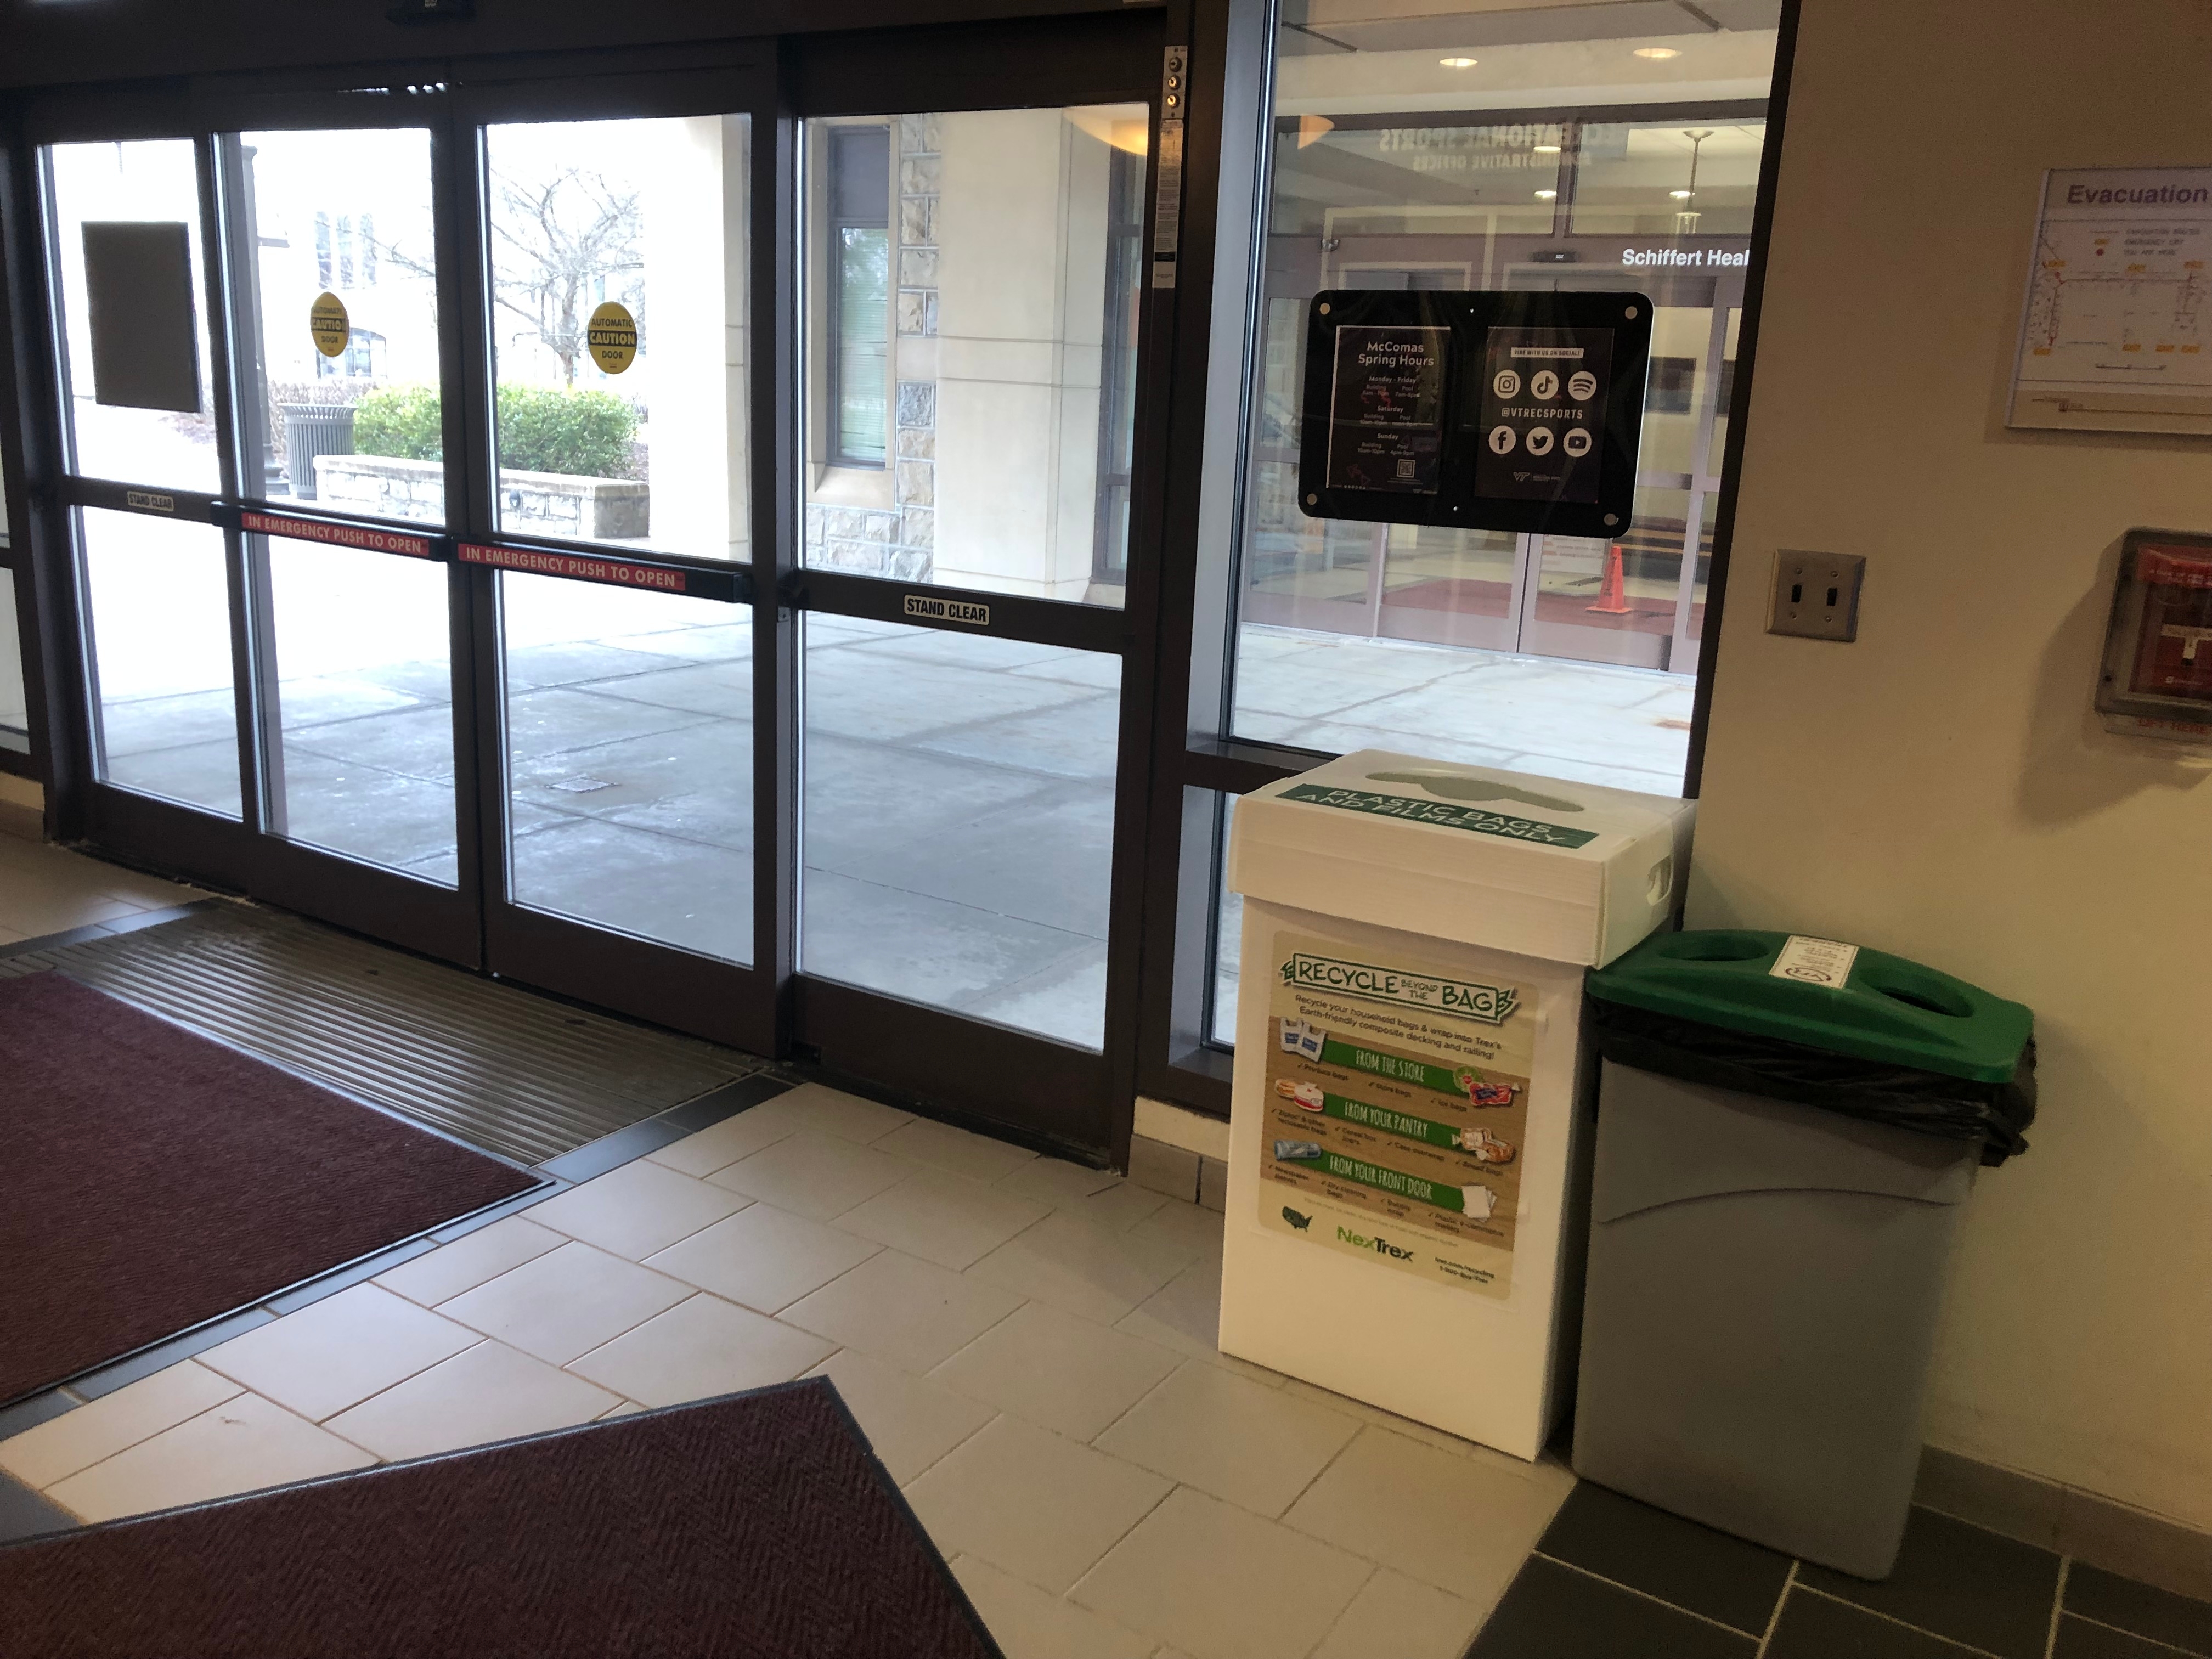 The image shows a NexTrex bin located just inside of the automatic doors to the McComas atrium. 